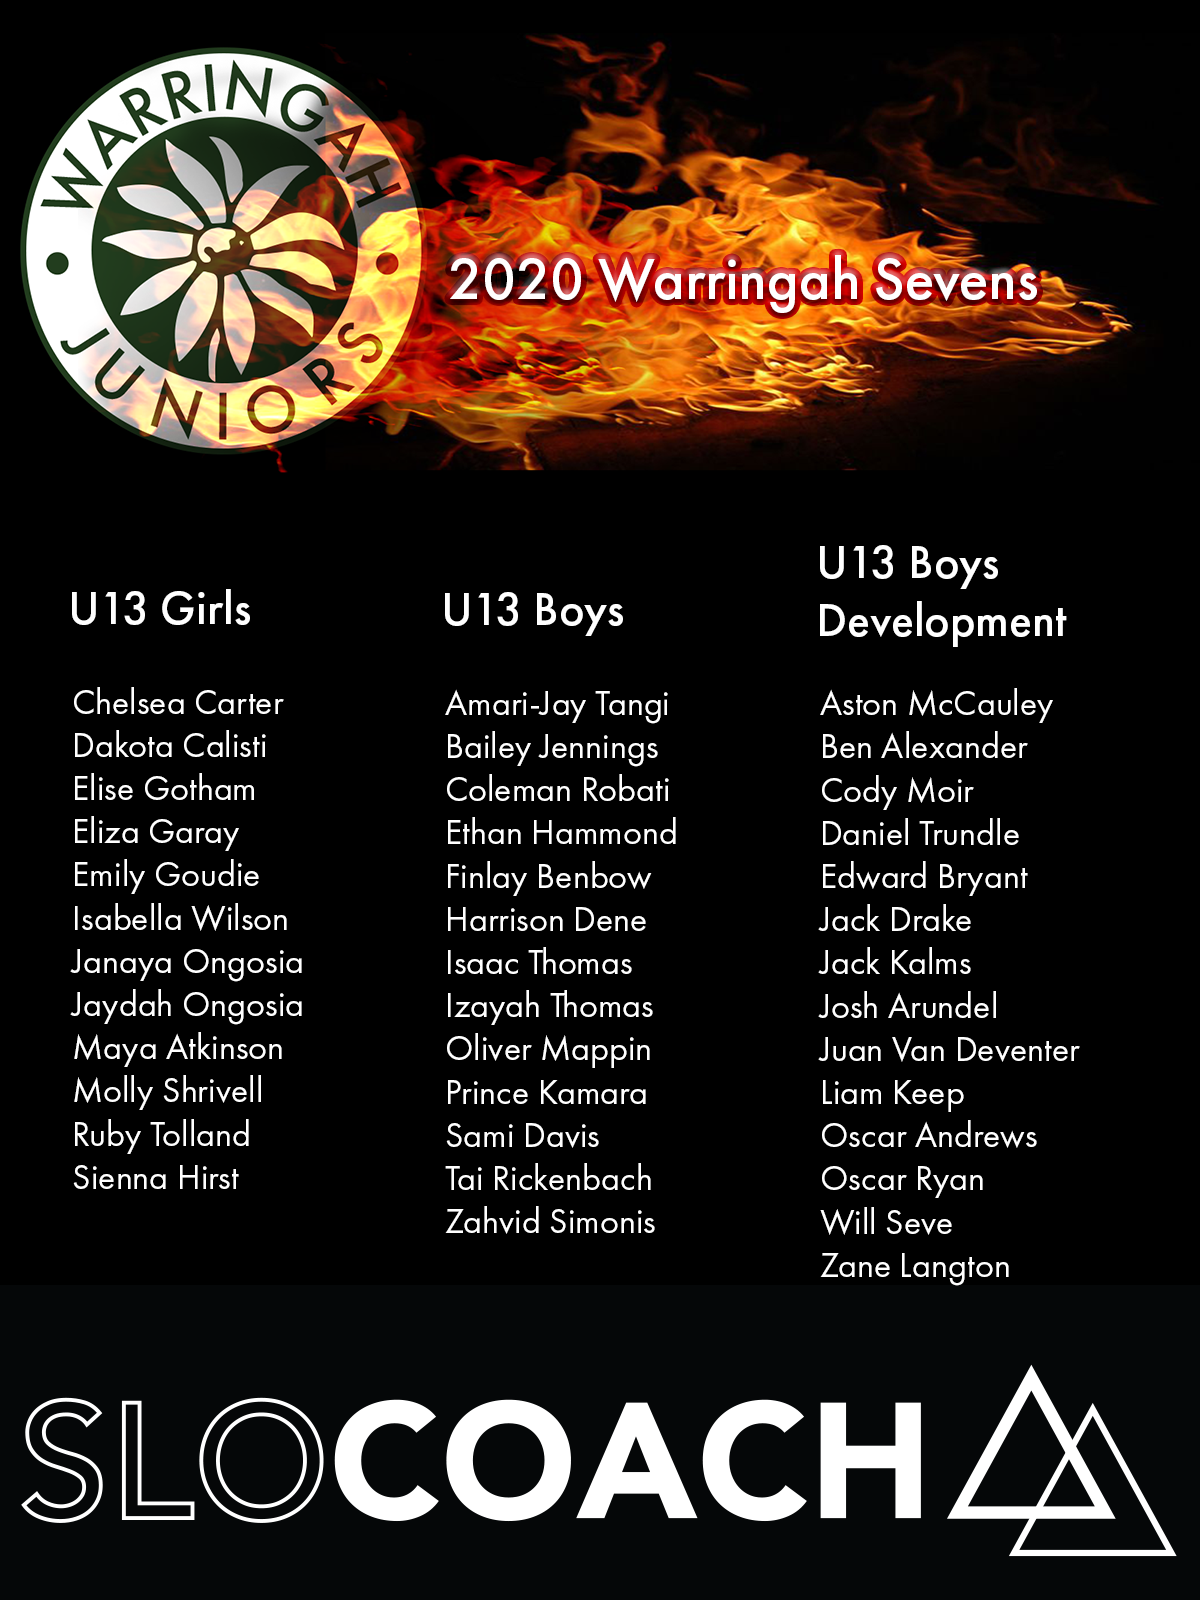 Good luck to all the Cougars players representing U13 Warringah Sevens tomorrow....